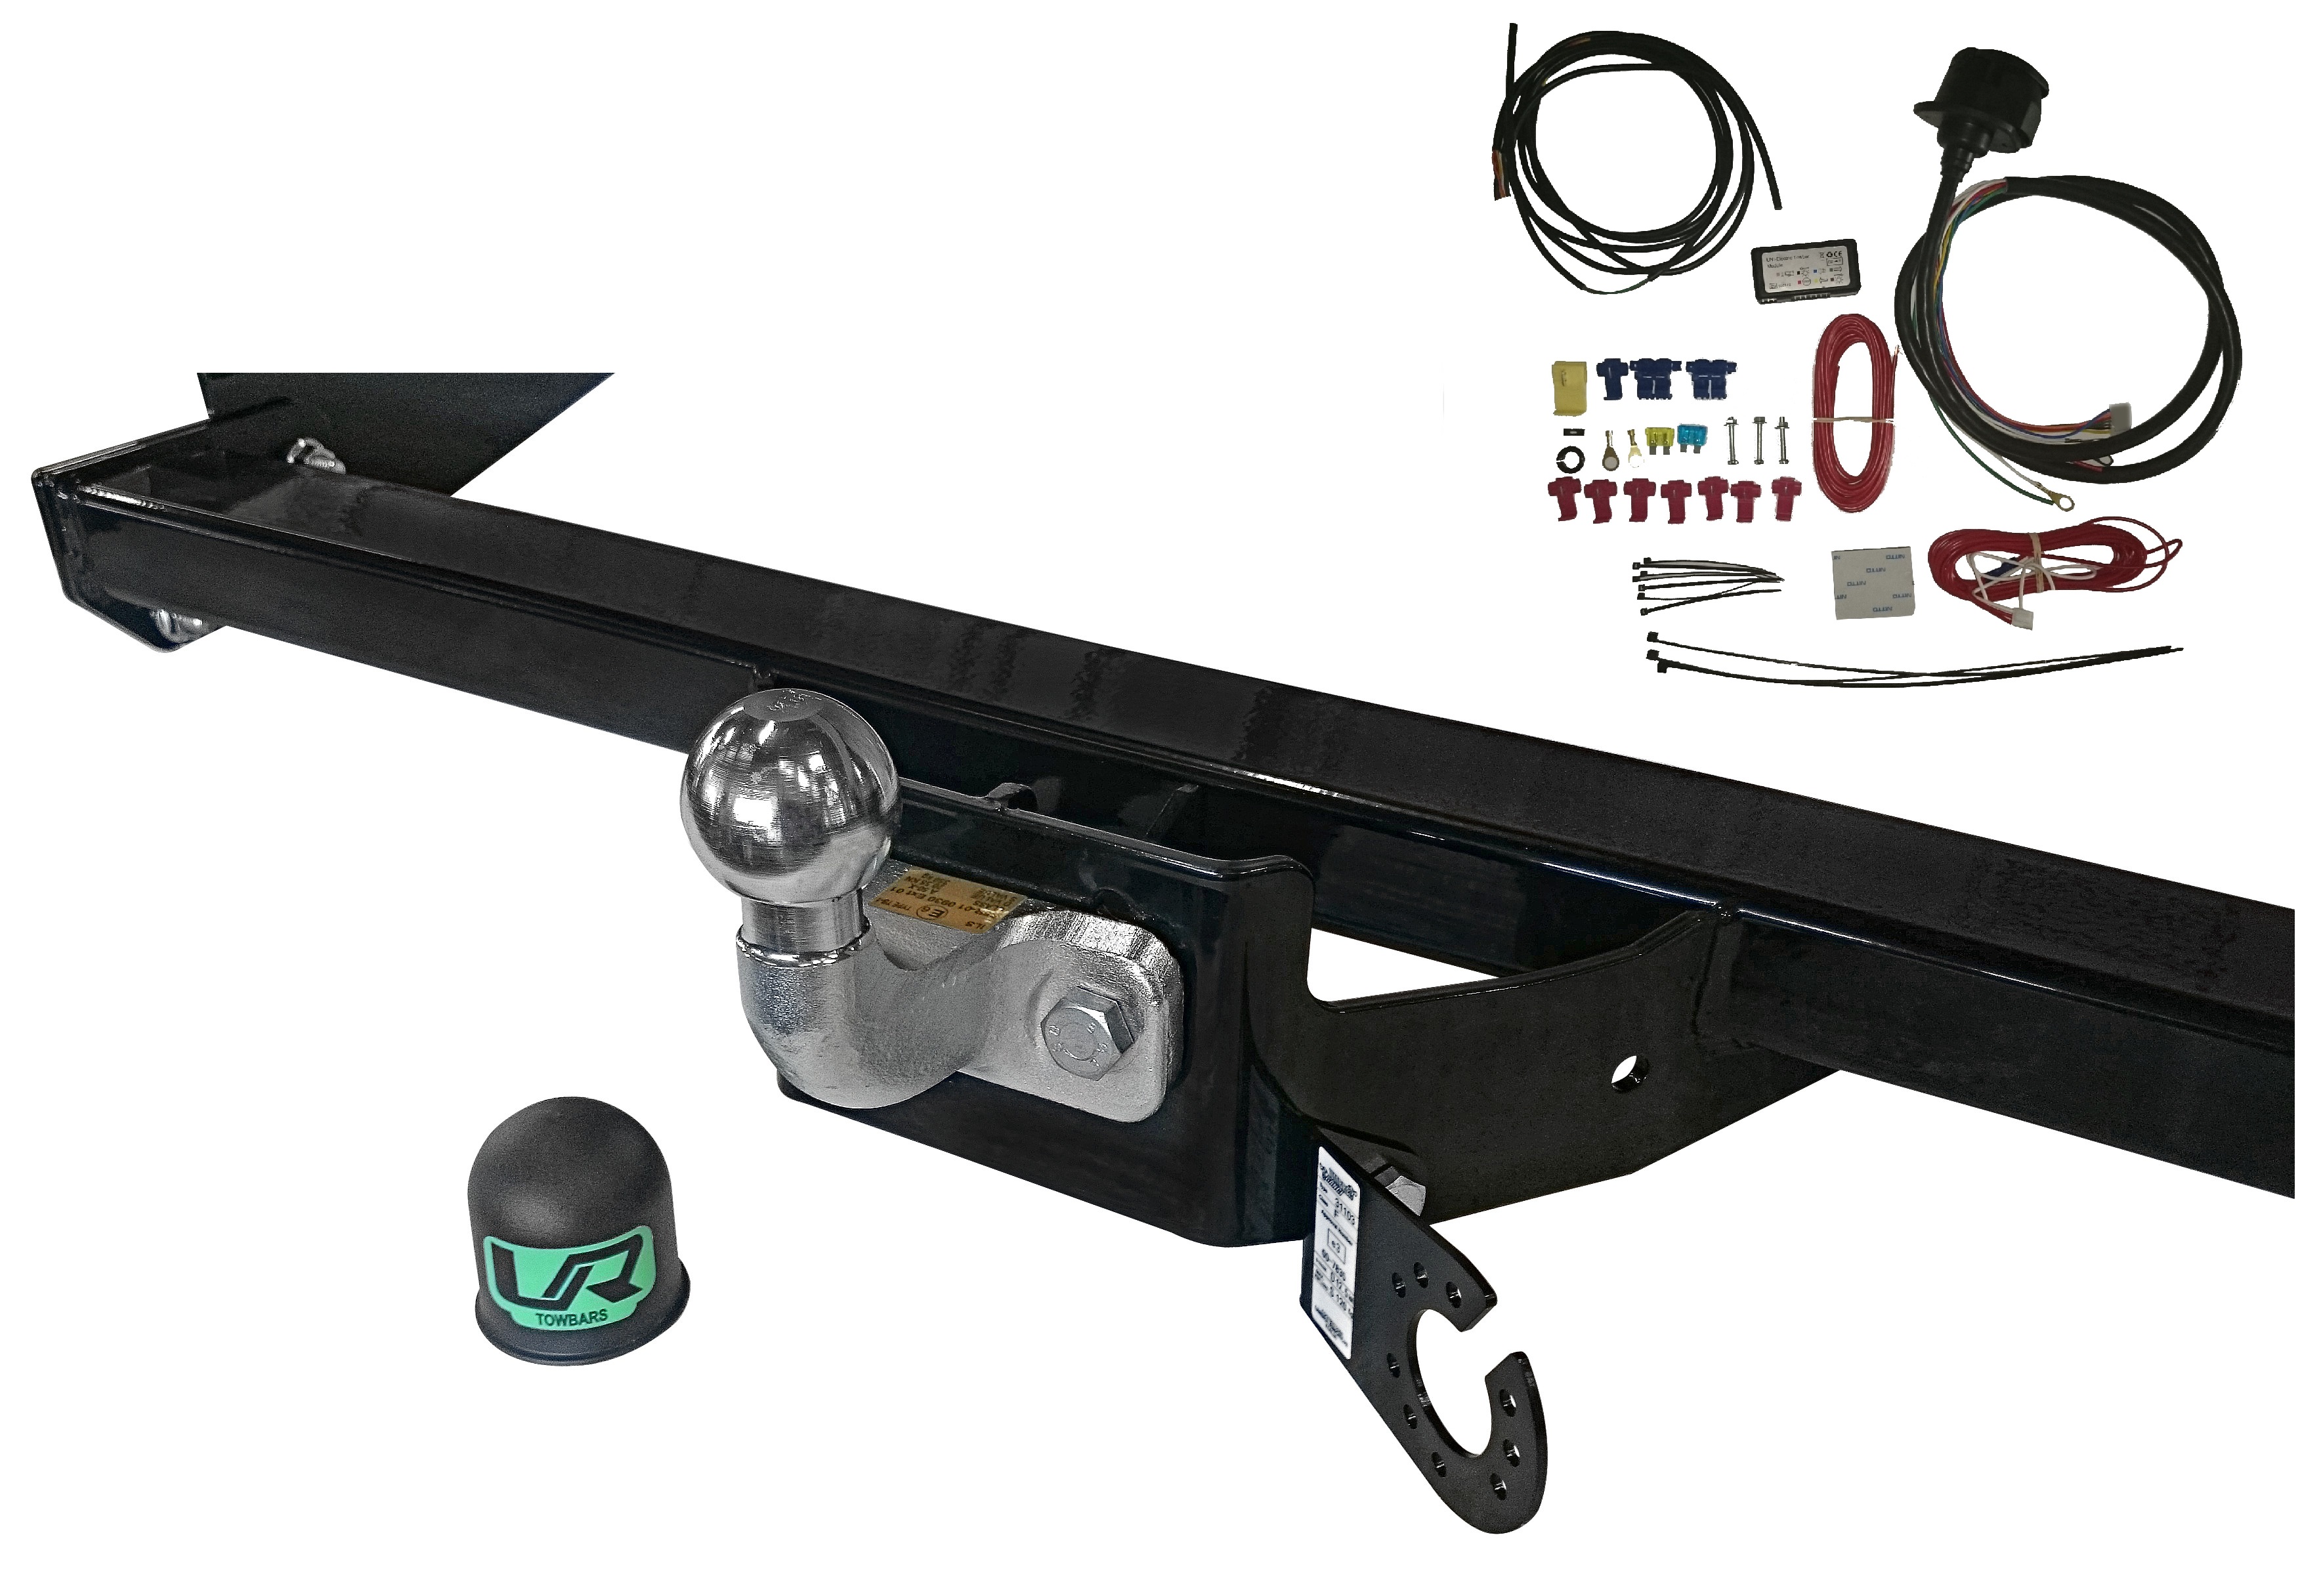 Tow Bar Installation Cost